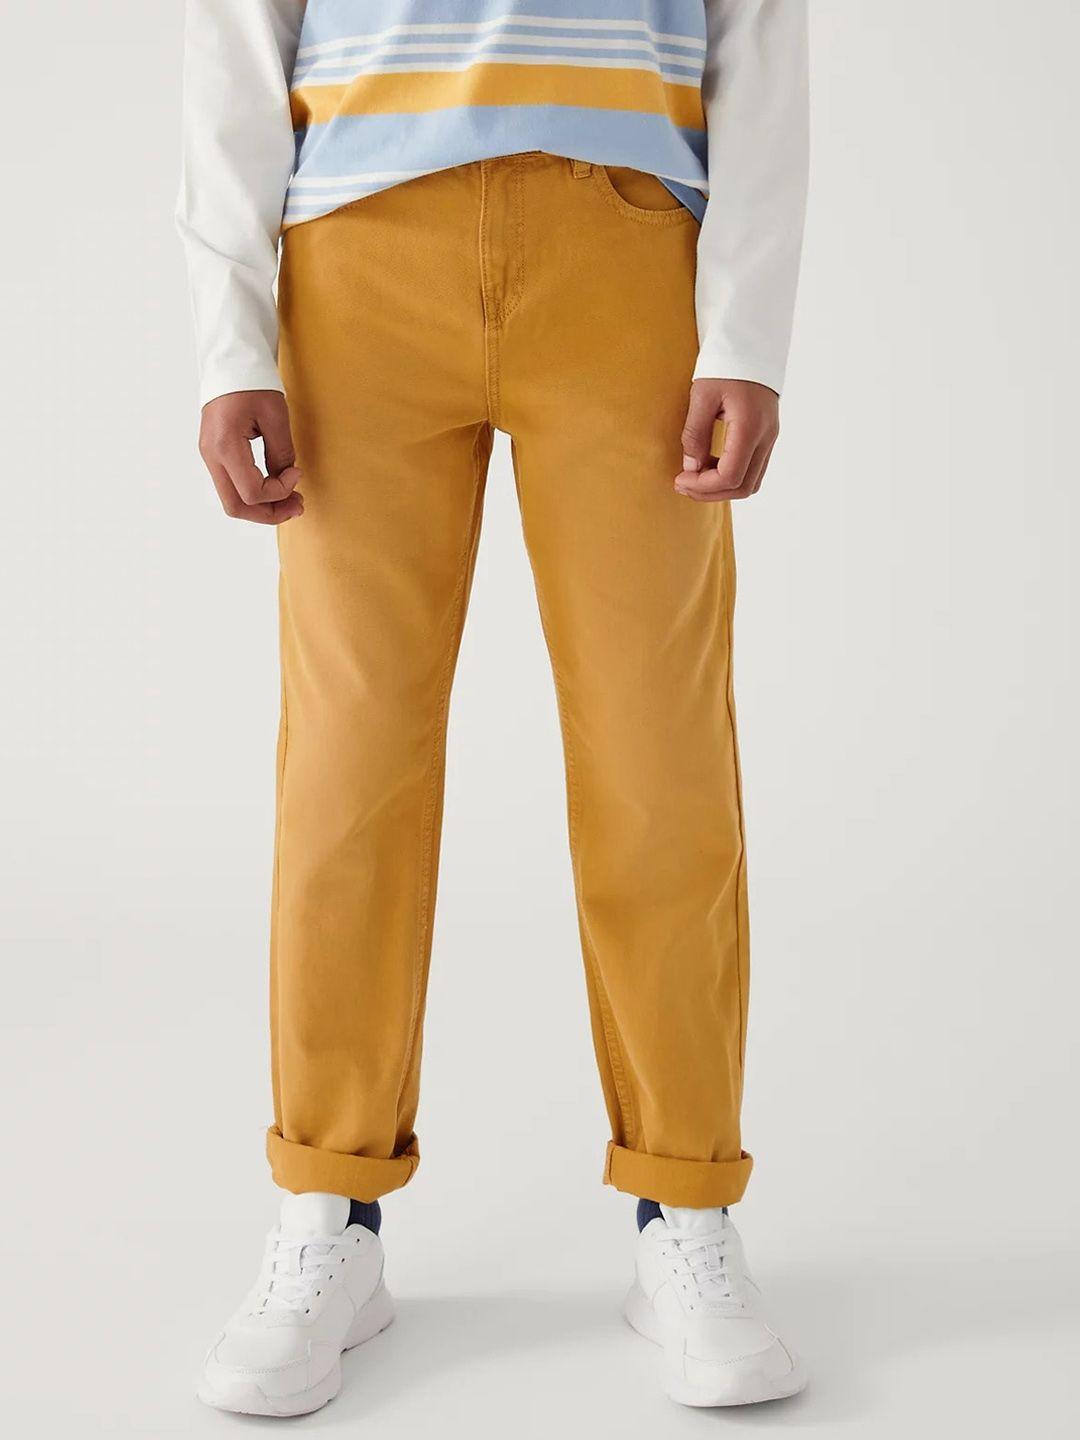 marks & spencer boys mid rise pure cotton chinos